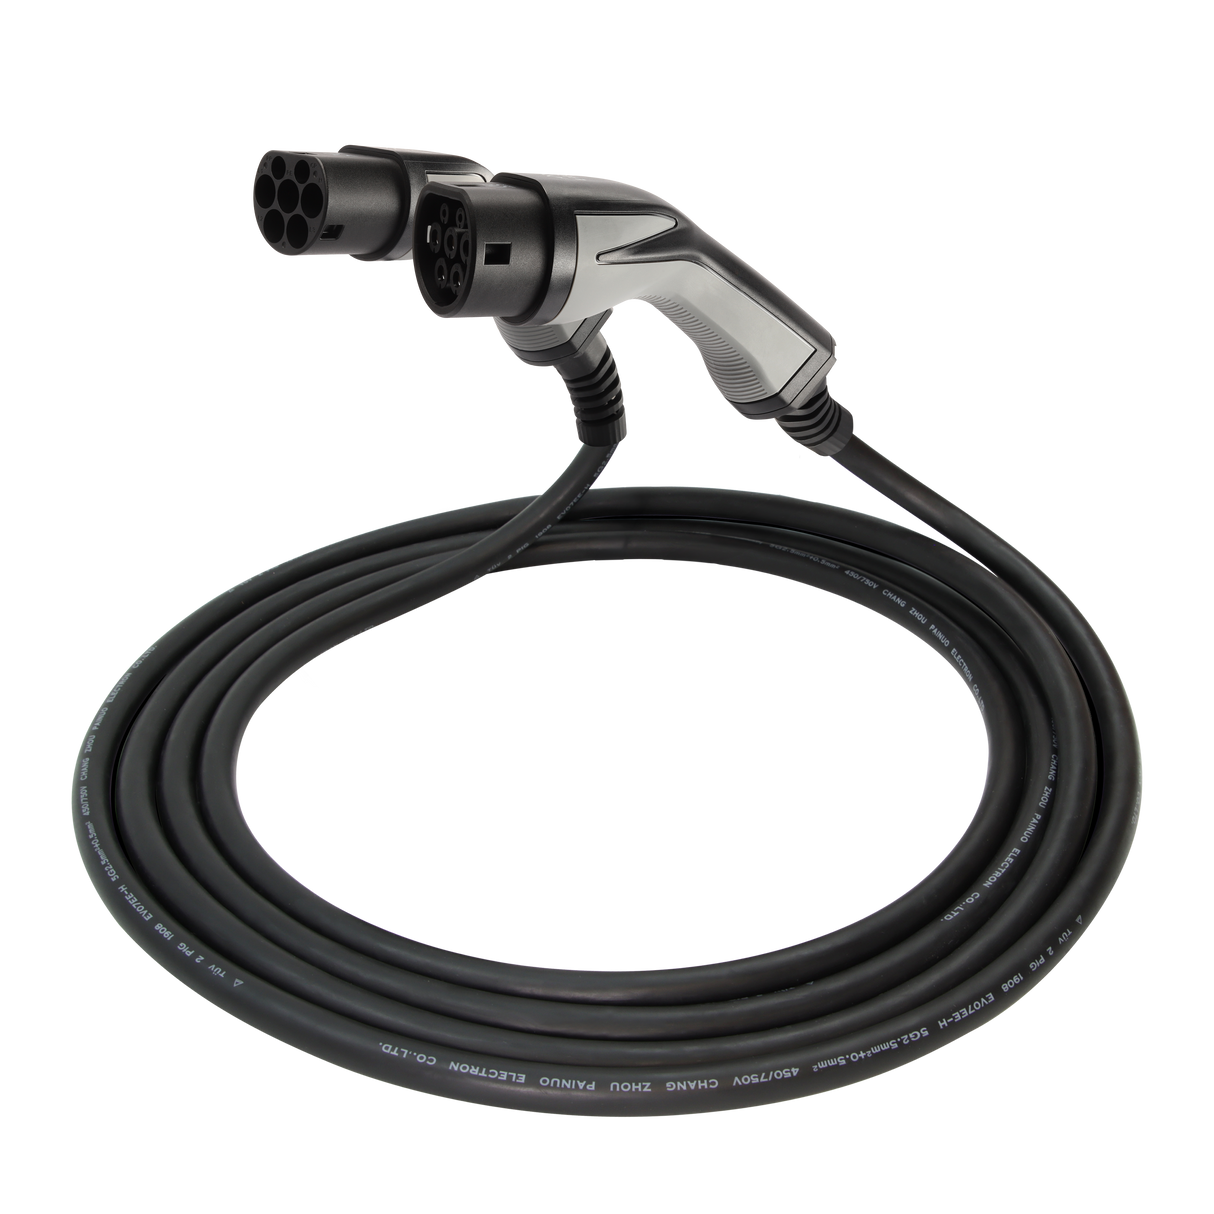 Charging cable Mercedes B -Class - Erock Pro Type 2 - 16A 3 phase (11 kW)